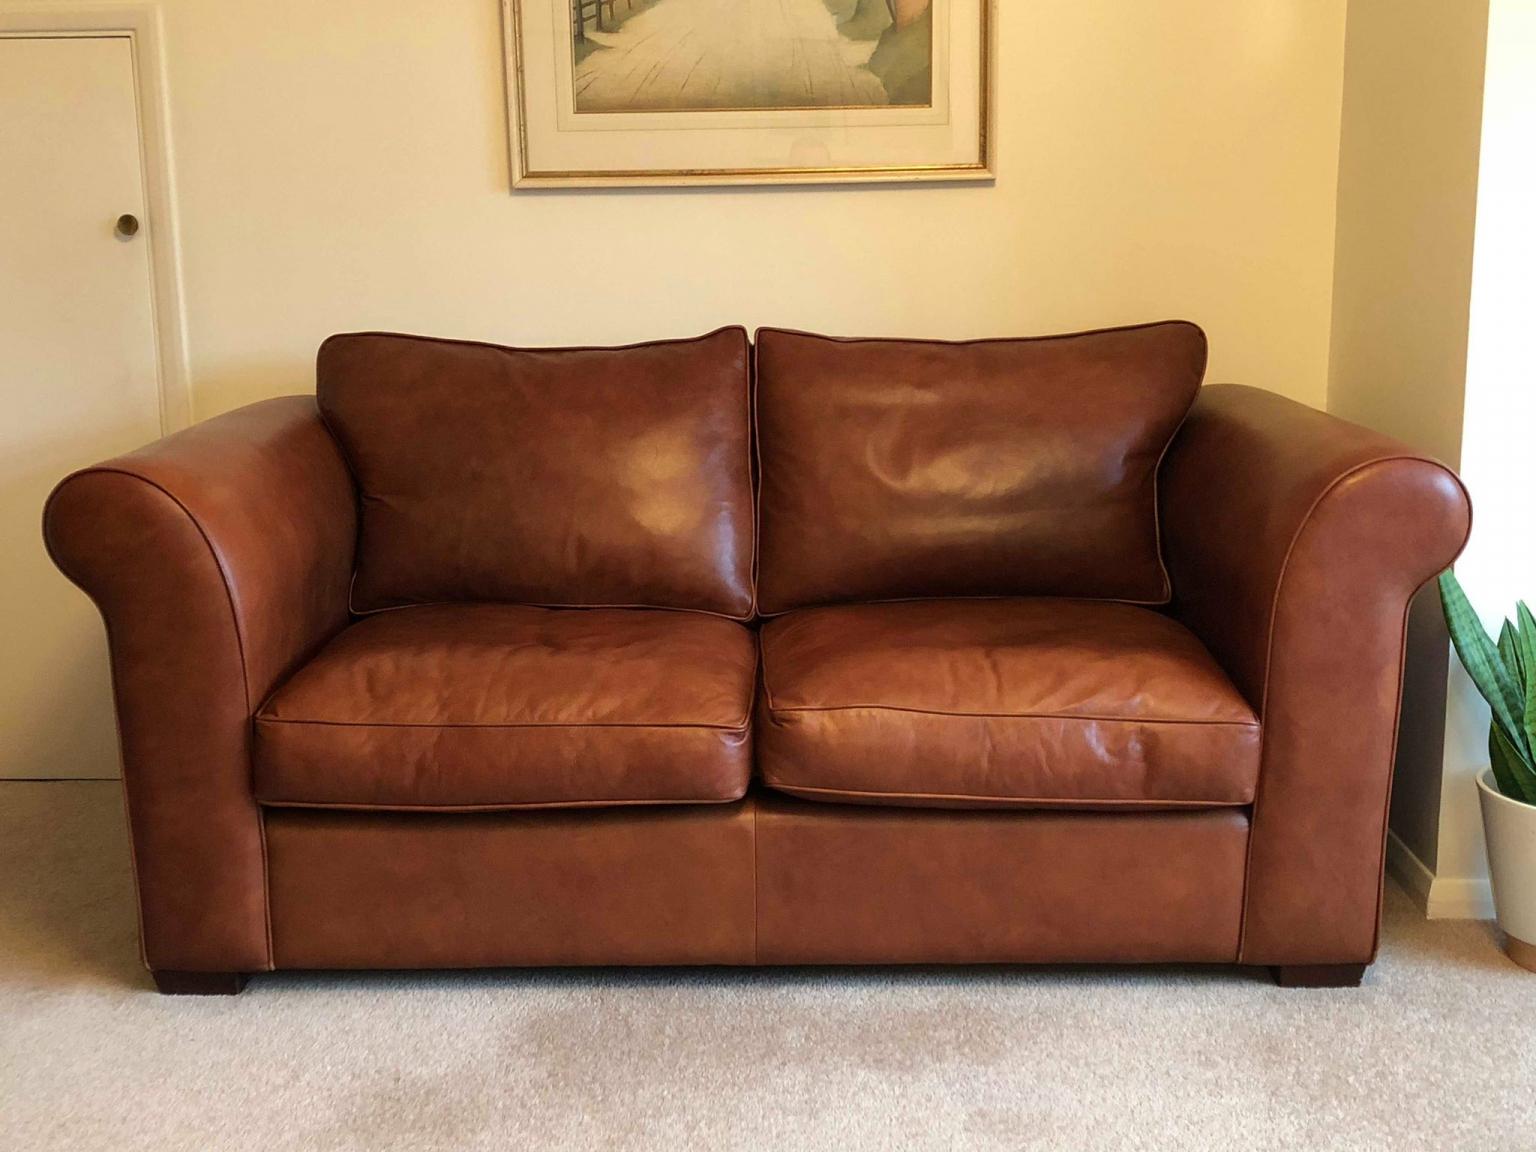 laura ashley brown leather sofa second hand